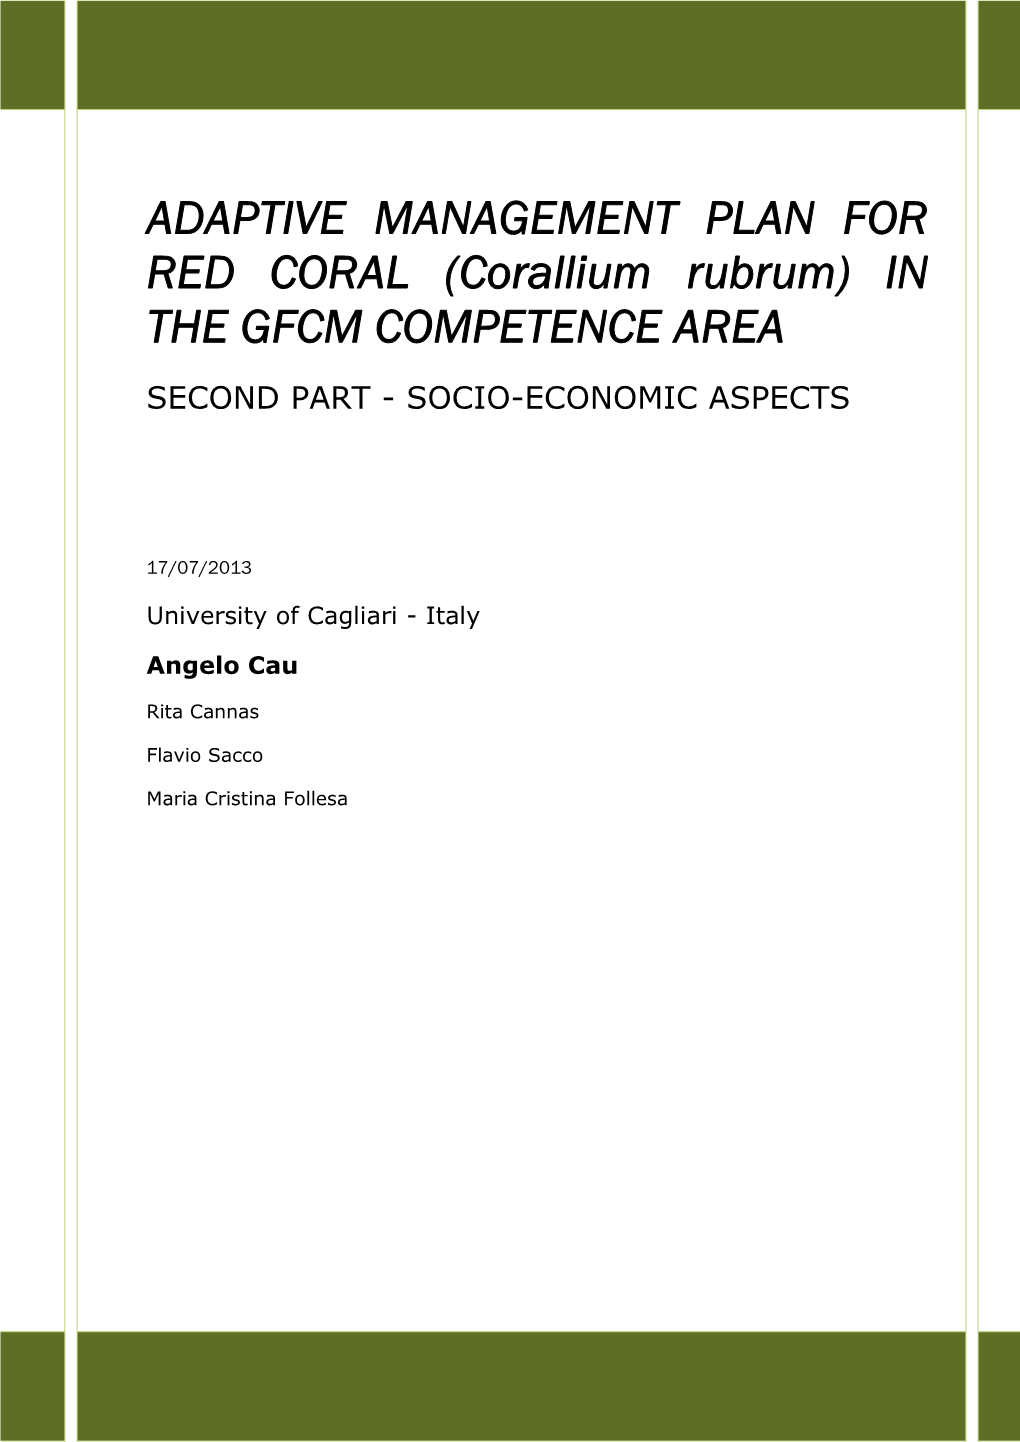 ADAPTIVE MANAGEMENT PLAN for RED CORAL (Corallium Rubrum) in the GFCM COMPETENCE AREA